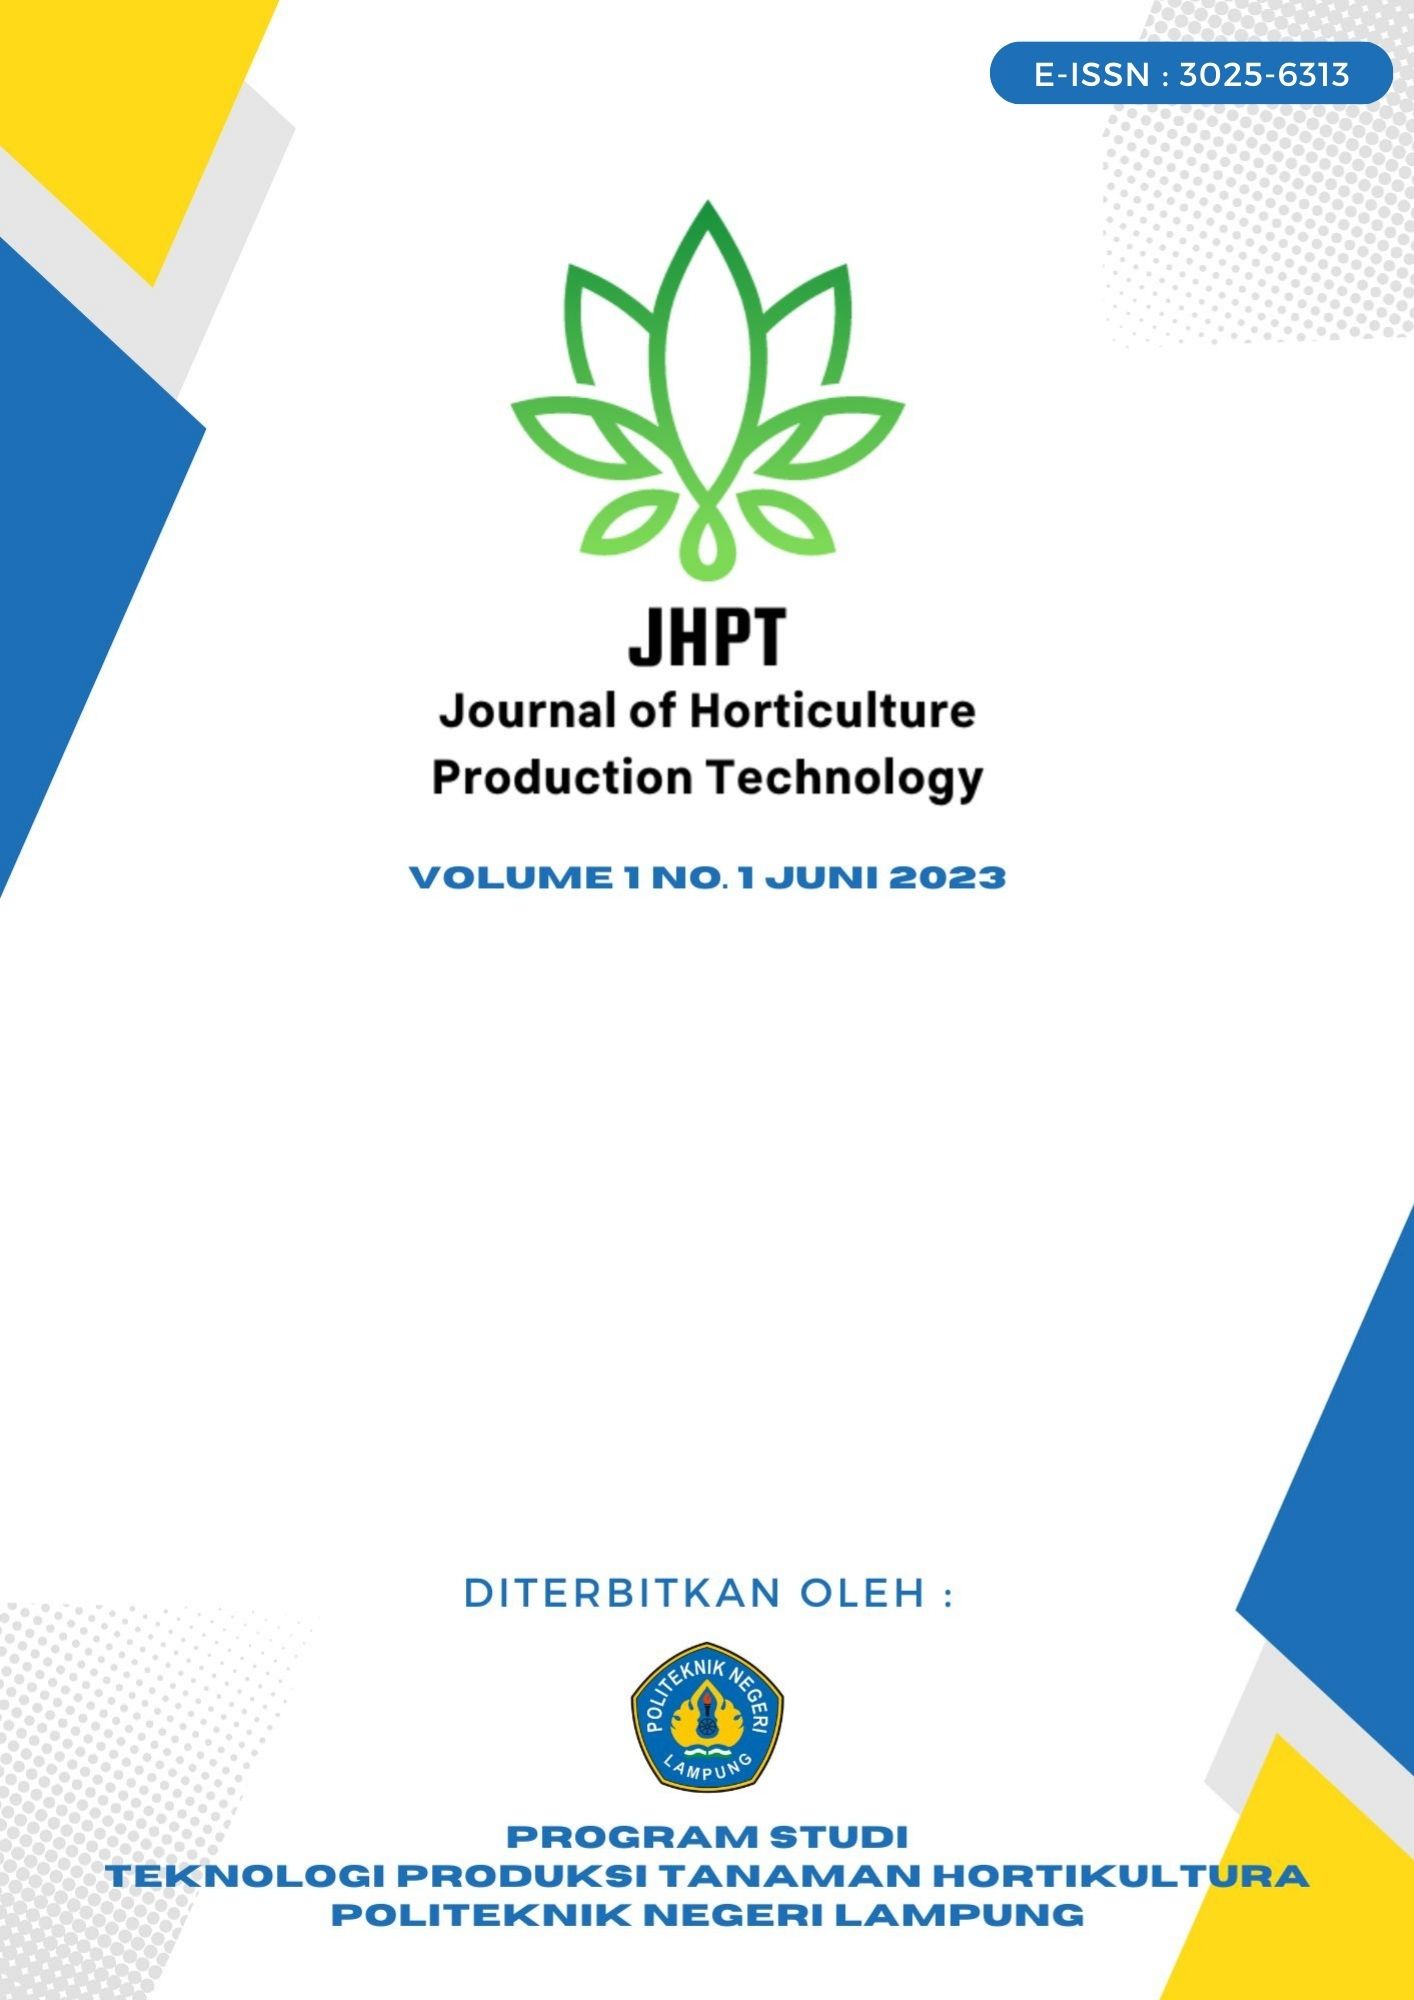 jhpt cover2